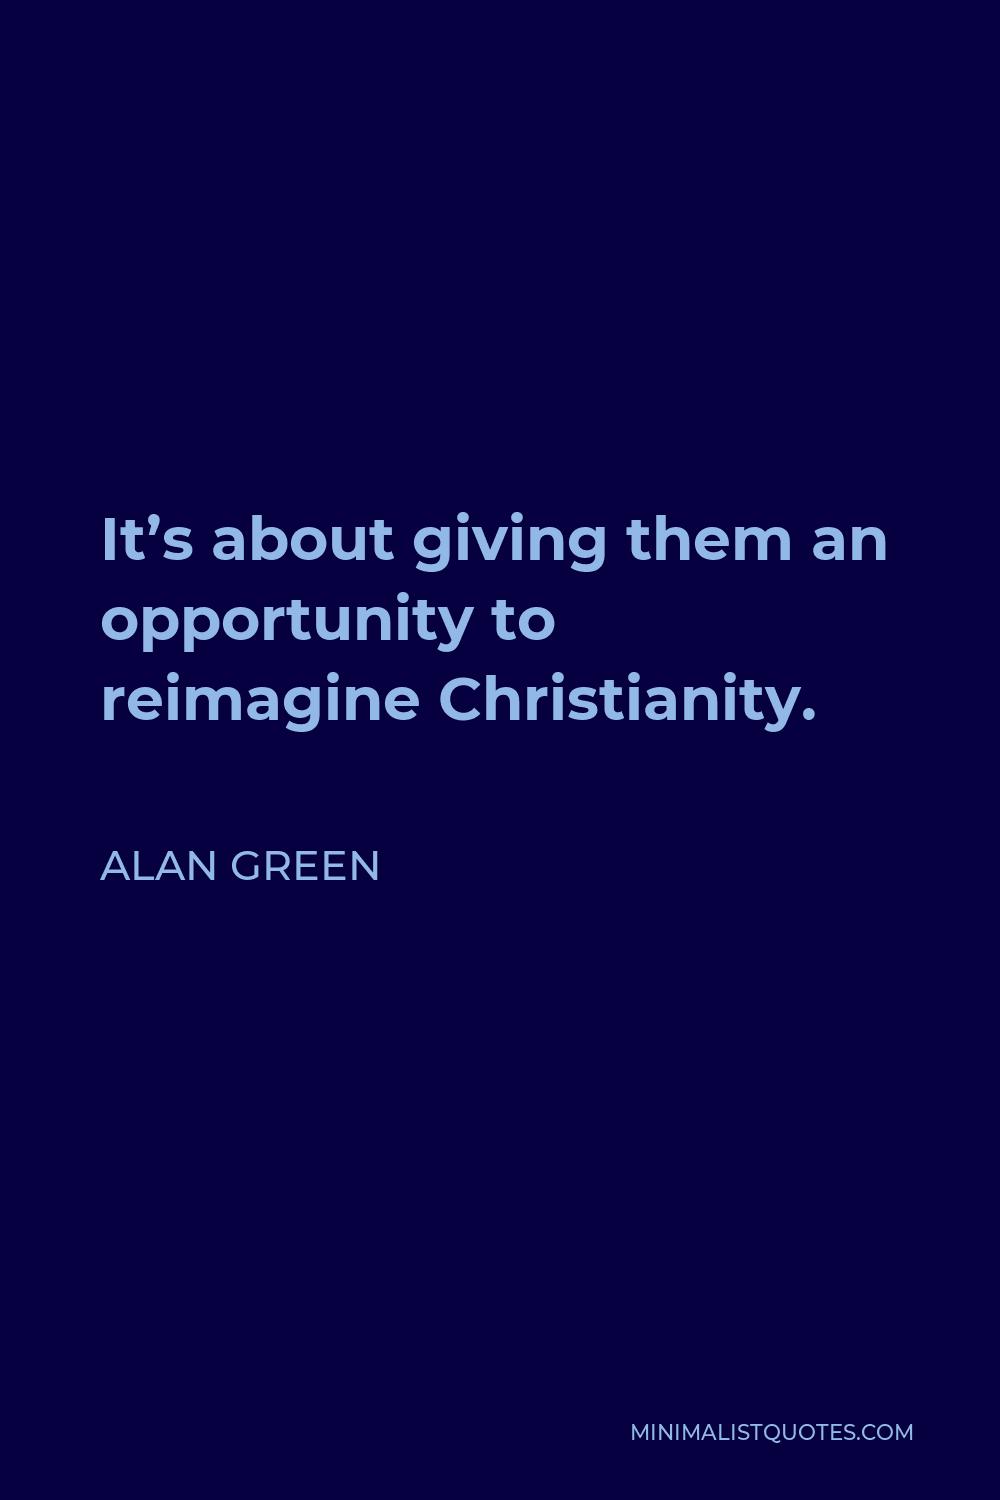 Alan Green Quote - It’s about giving them an opportunity to reimagine Christianity.